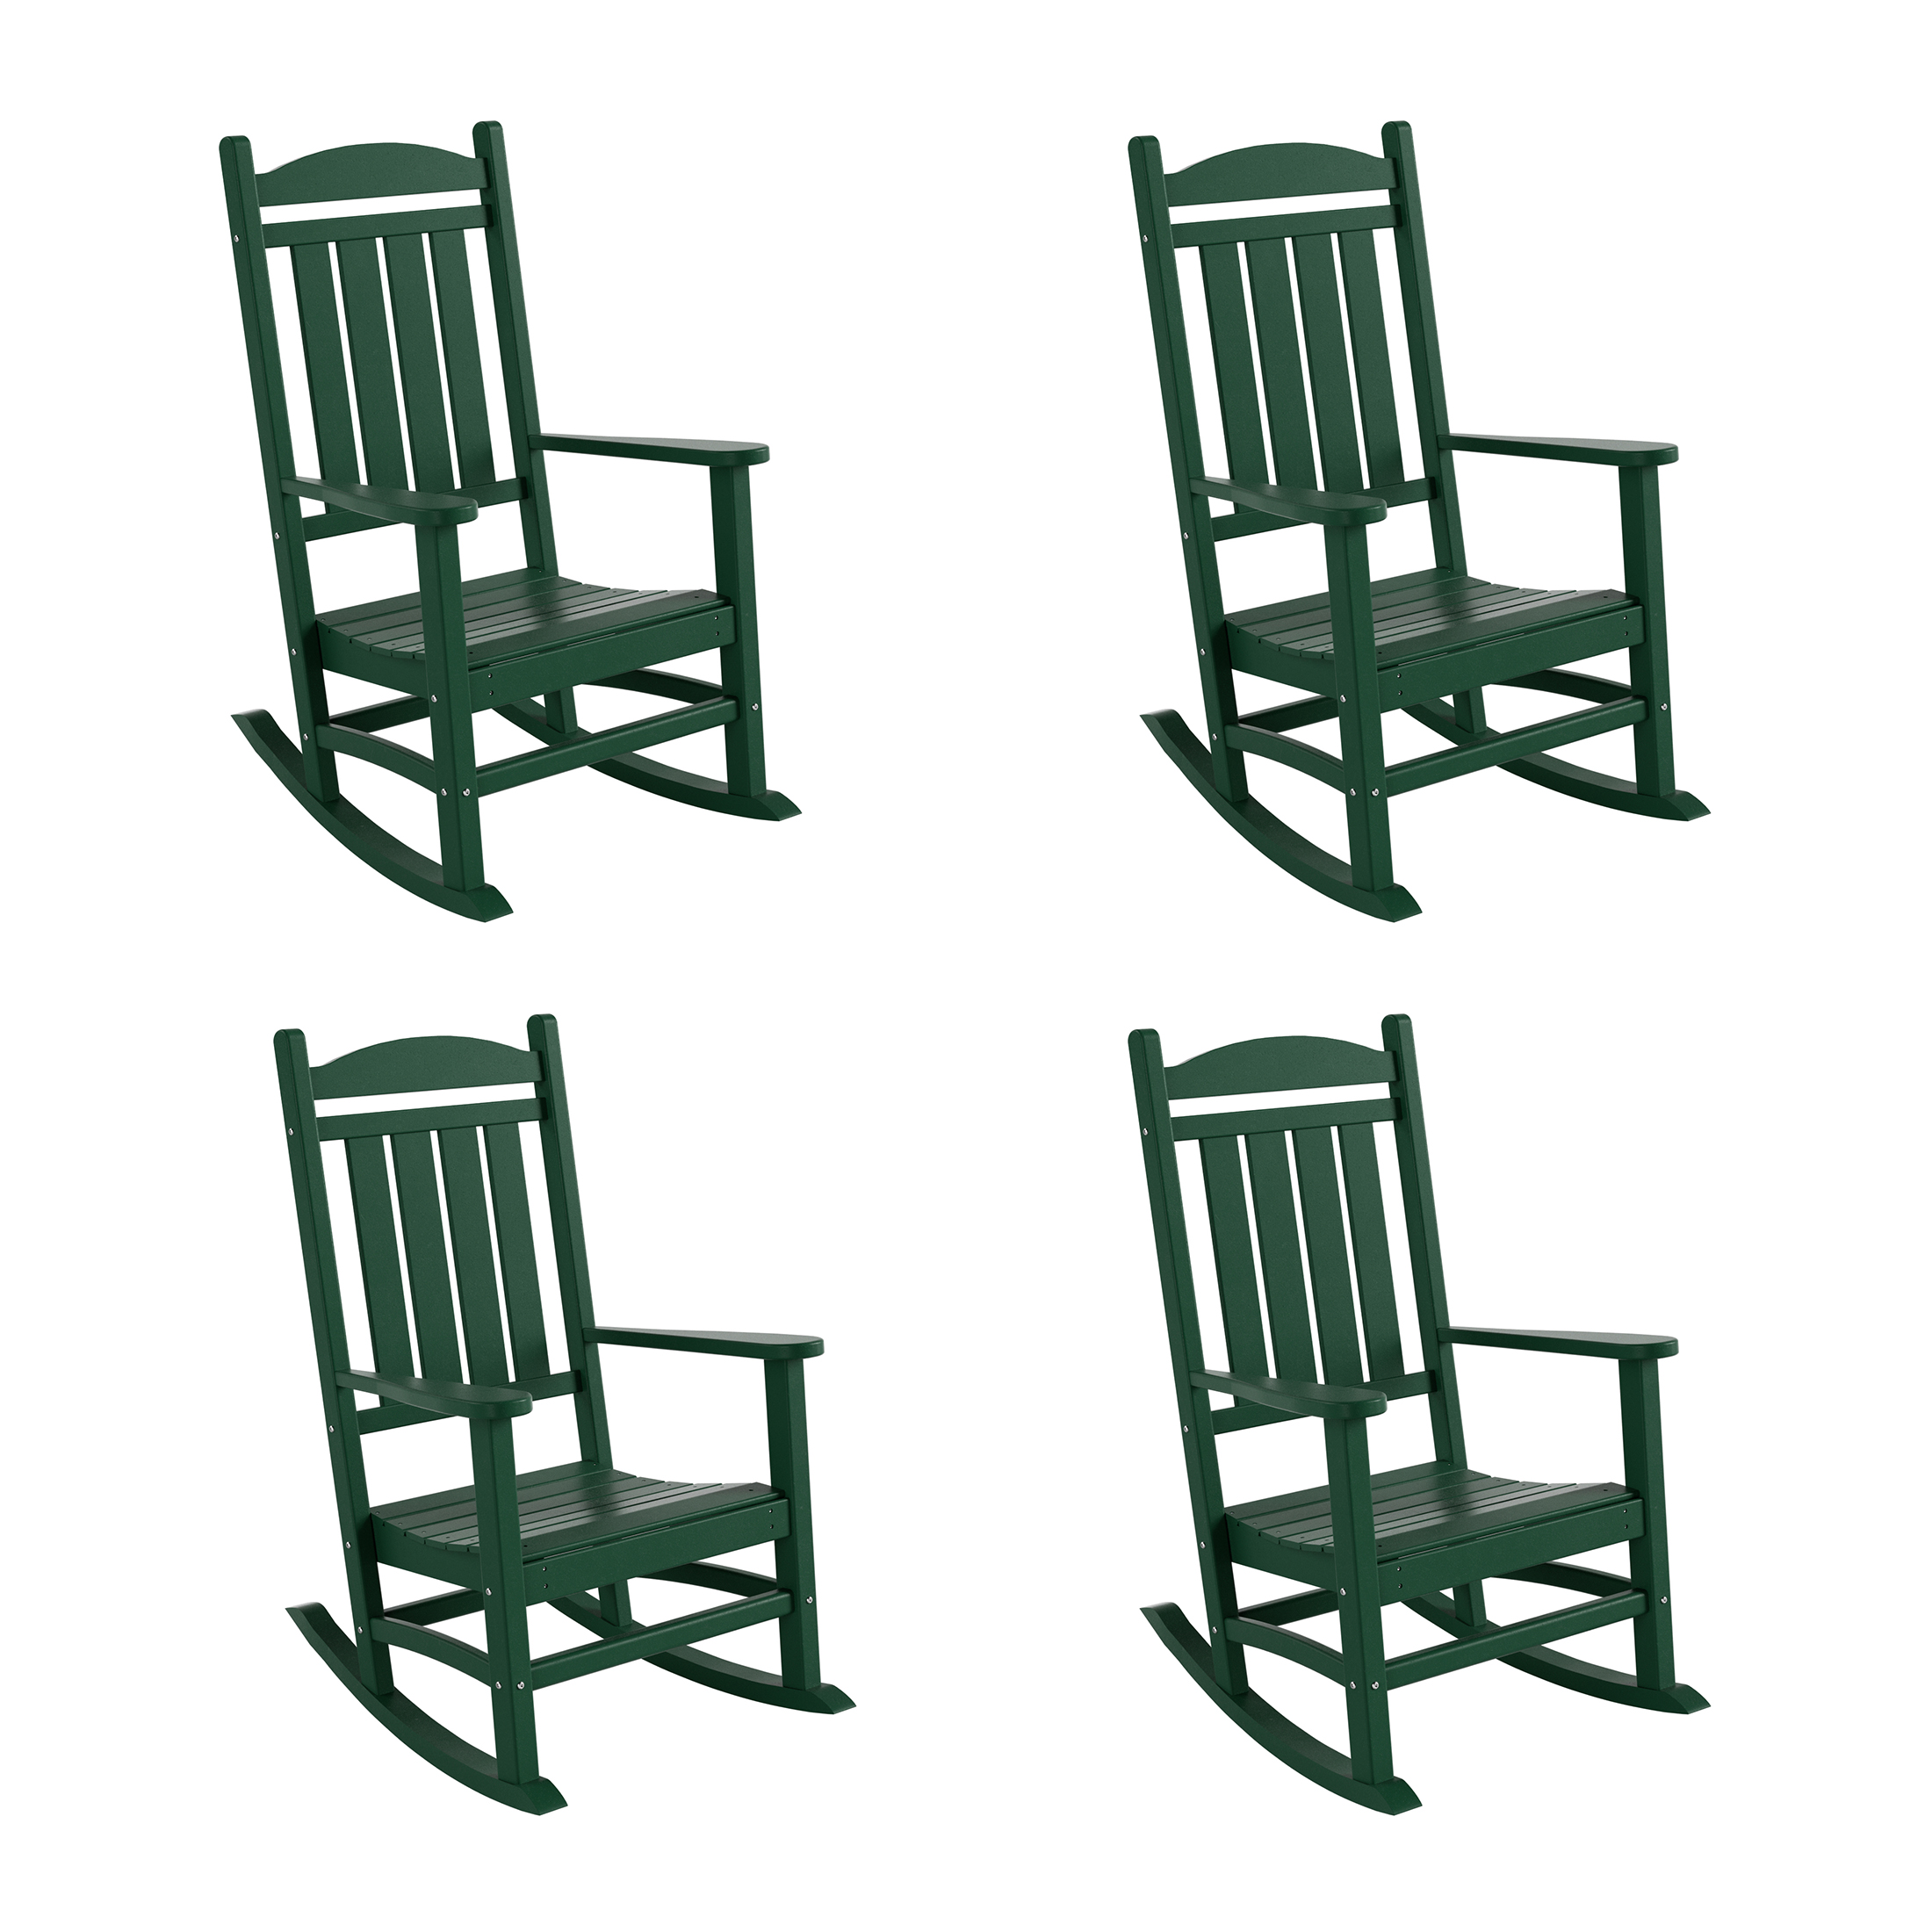 Costaelm Paradise Classic Plastic Outdoor Porch Rocking Chairs (Set of 4), Dark Green - image 1 of 8